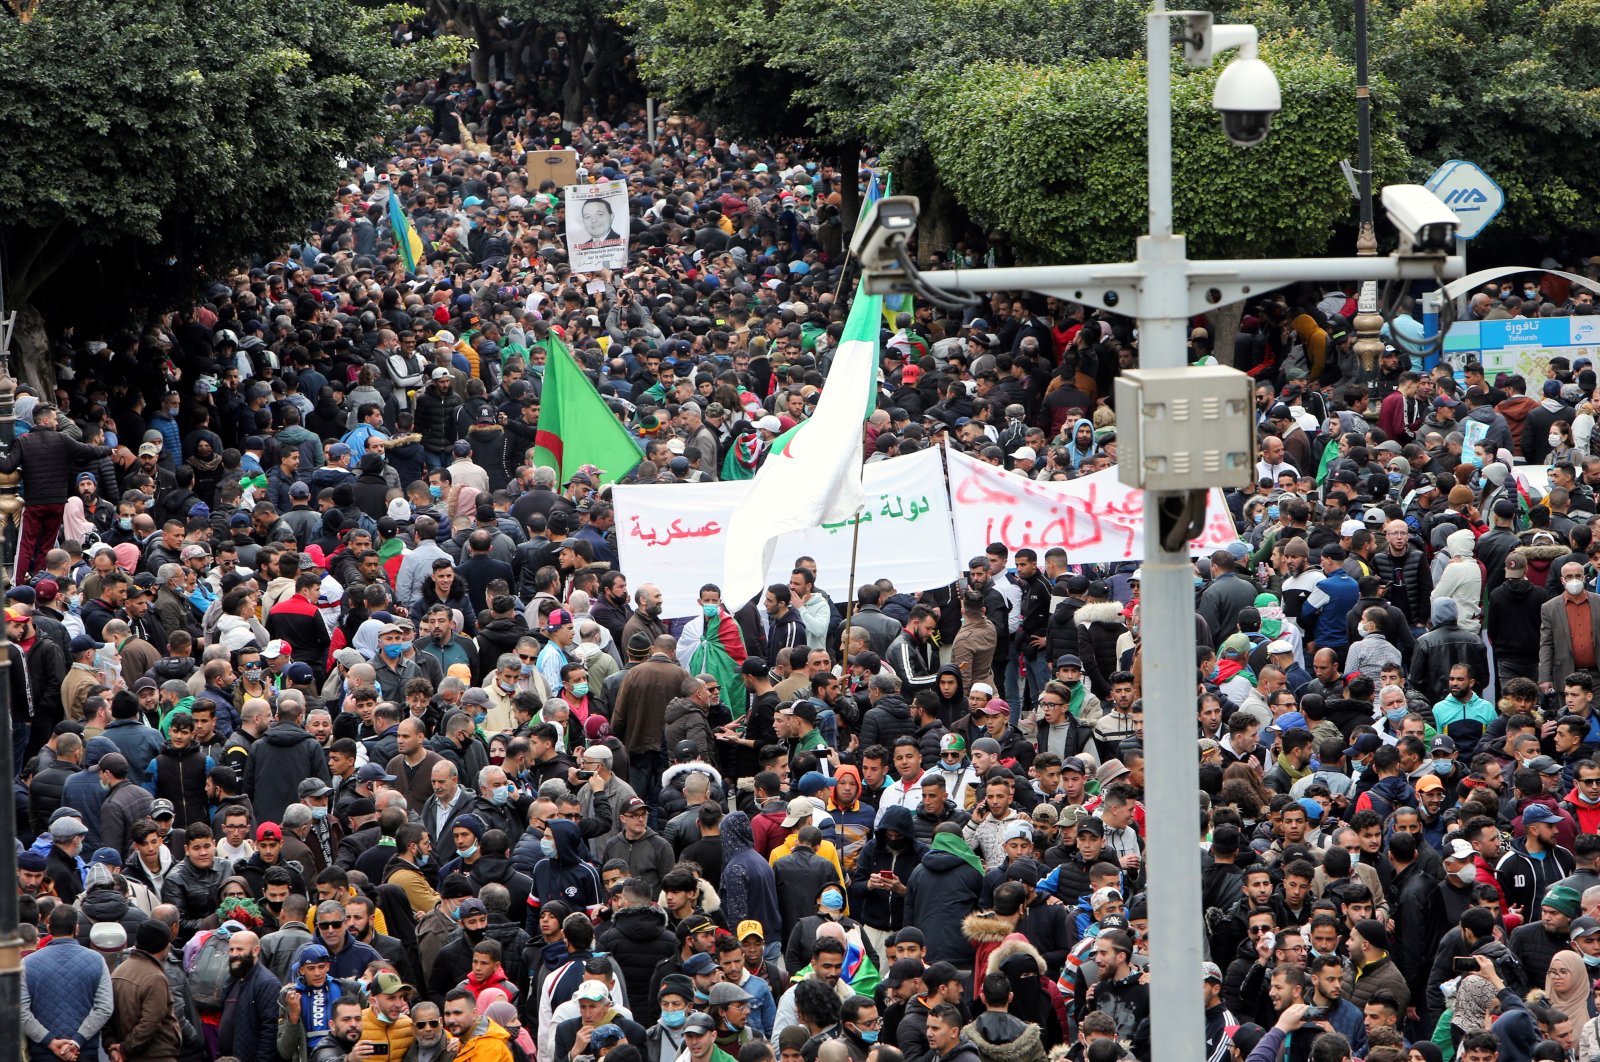 Demonstrators carry banners and flags as they march to mark the second anniversary of a mass protest movement demanding political change, in Algiers, Algeria, Feb. 22, 2021. (Reuters Photo)